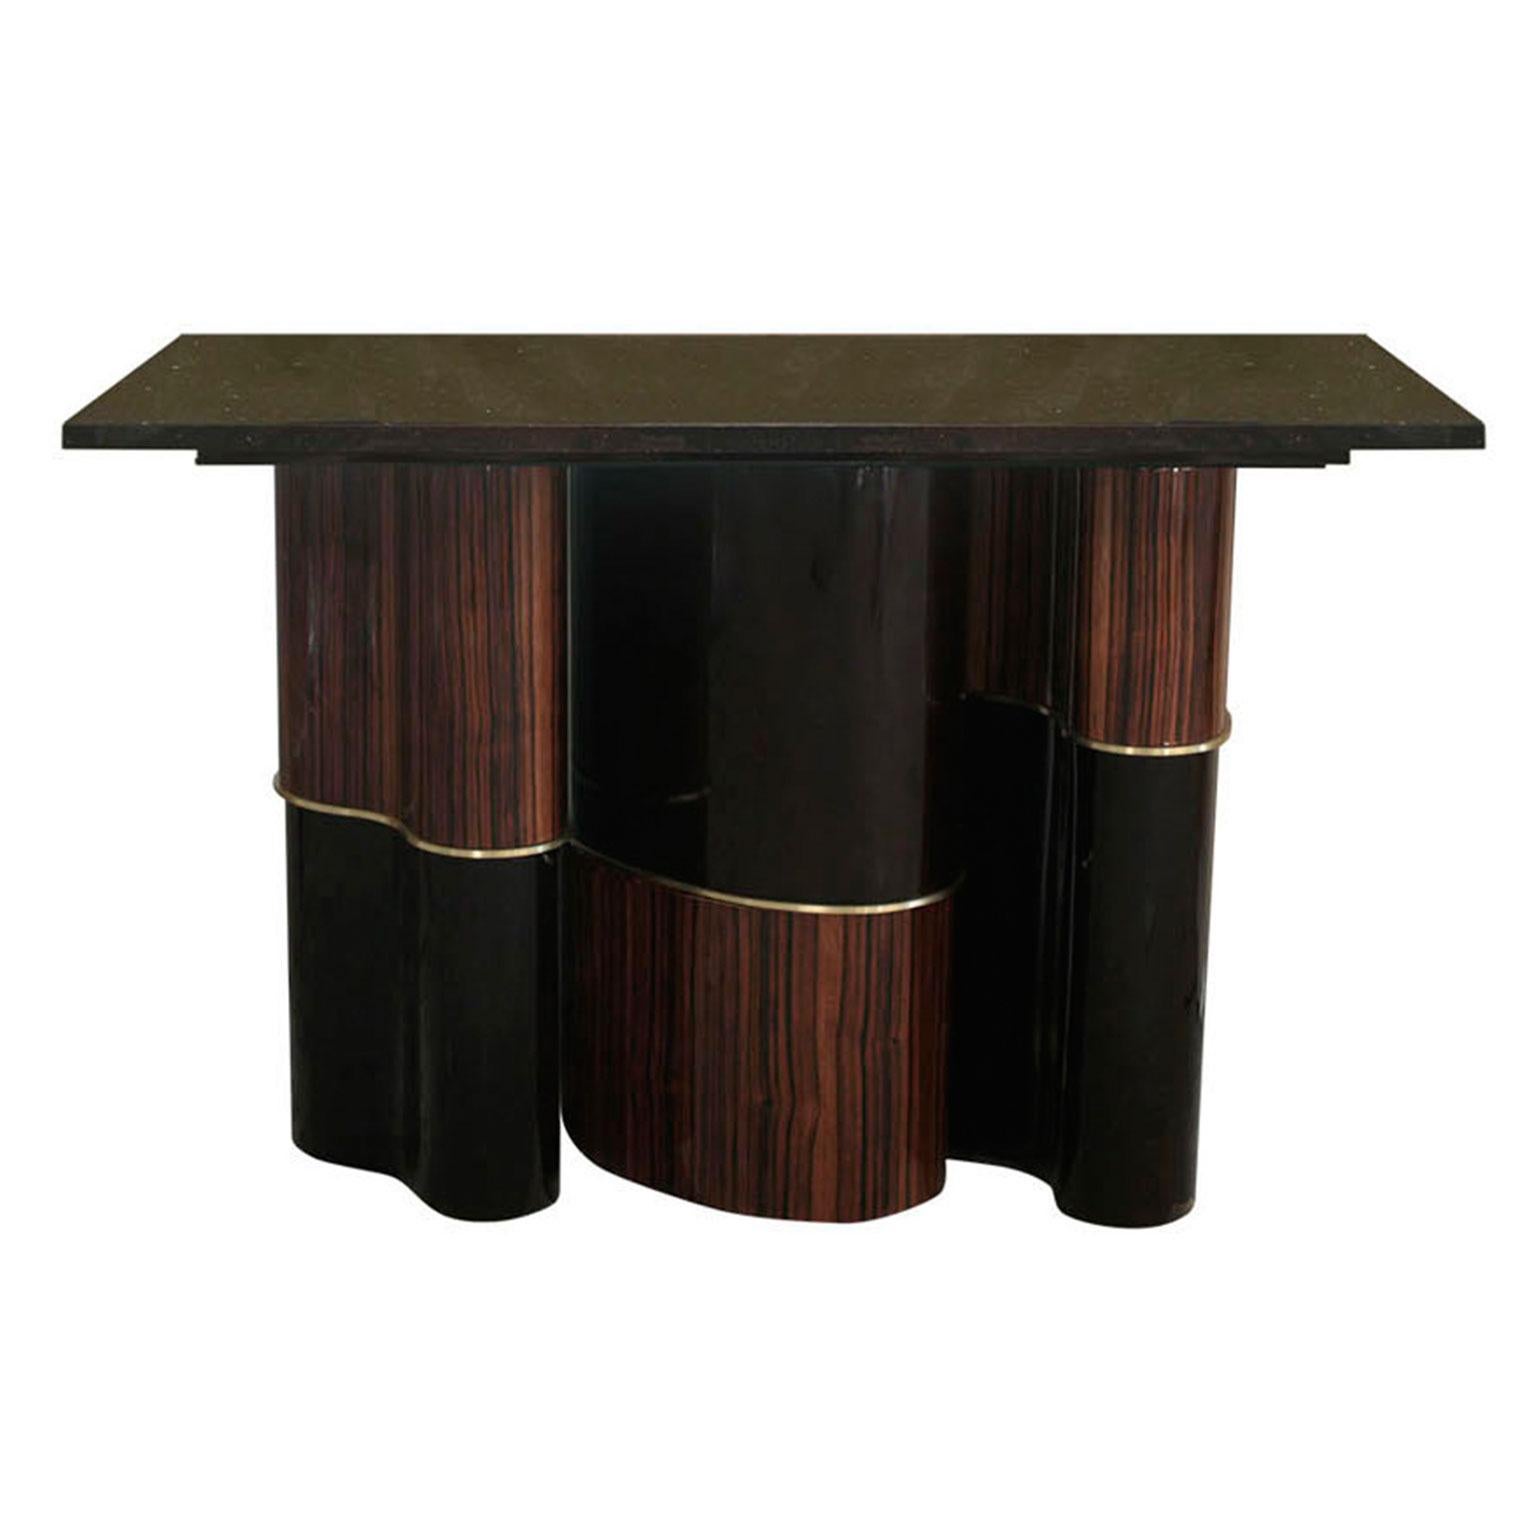 Modern console with three part curved pedestal base crafted in Macassar, brass and black lacquer, finished off in a high gloss. Custom materials and finishes upon request including sizes. Tops available in black or white marble or granite. 
Please